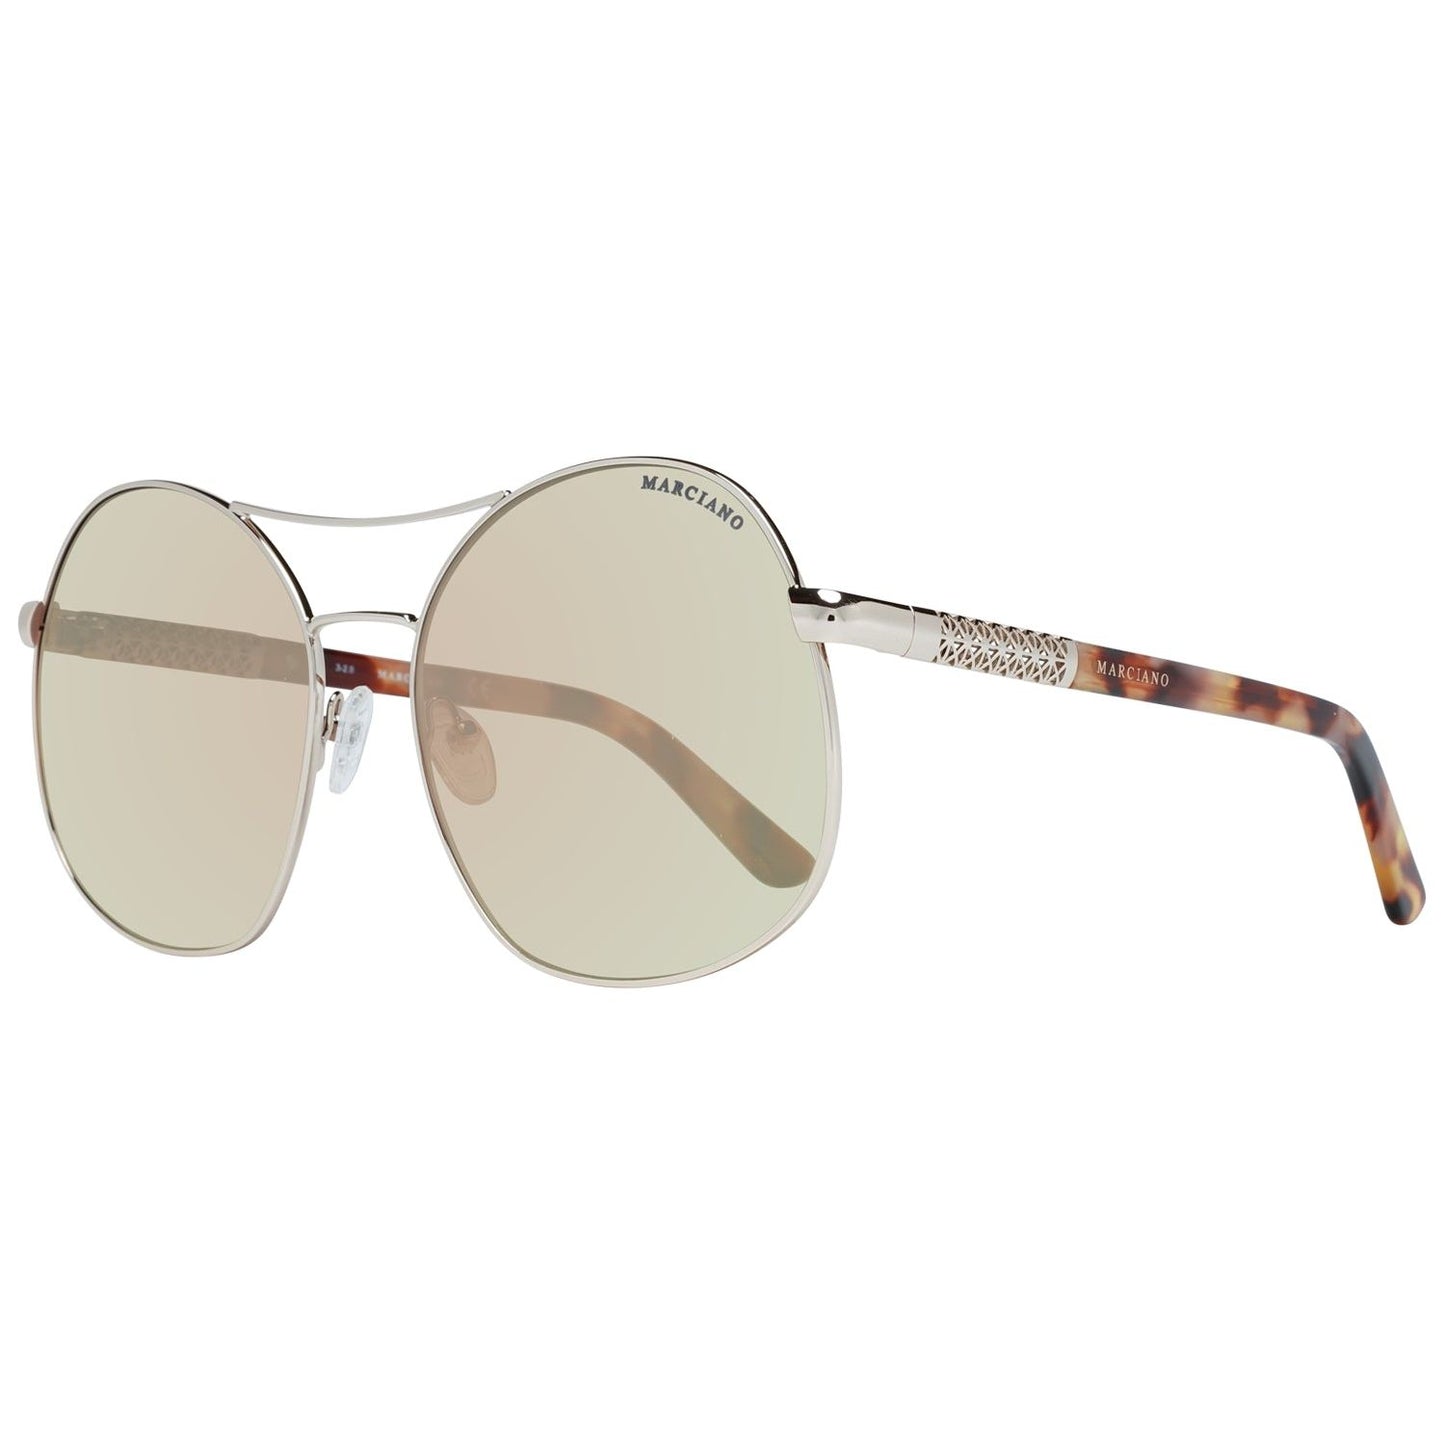 MARCIANO By GUESS SUNGLASSESMARCIANO BY GUESS MOD. GM0807 6232BMcRichard Designer Brands£118.00